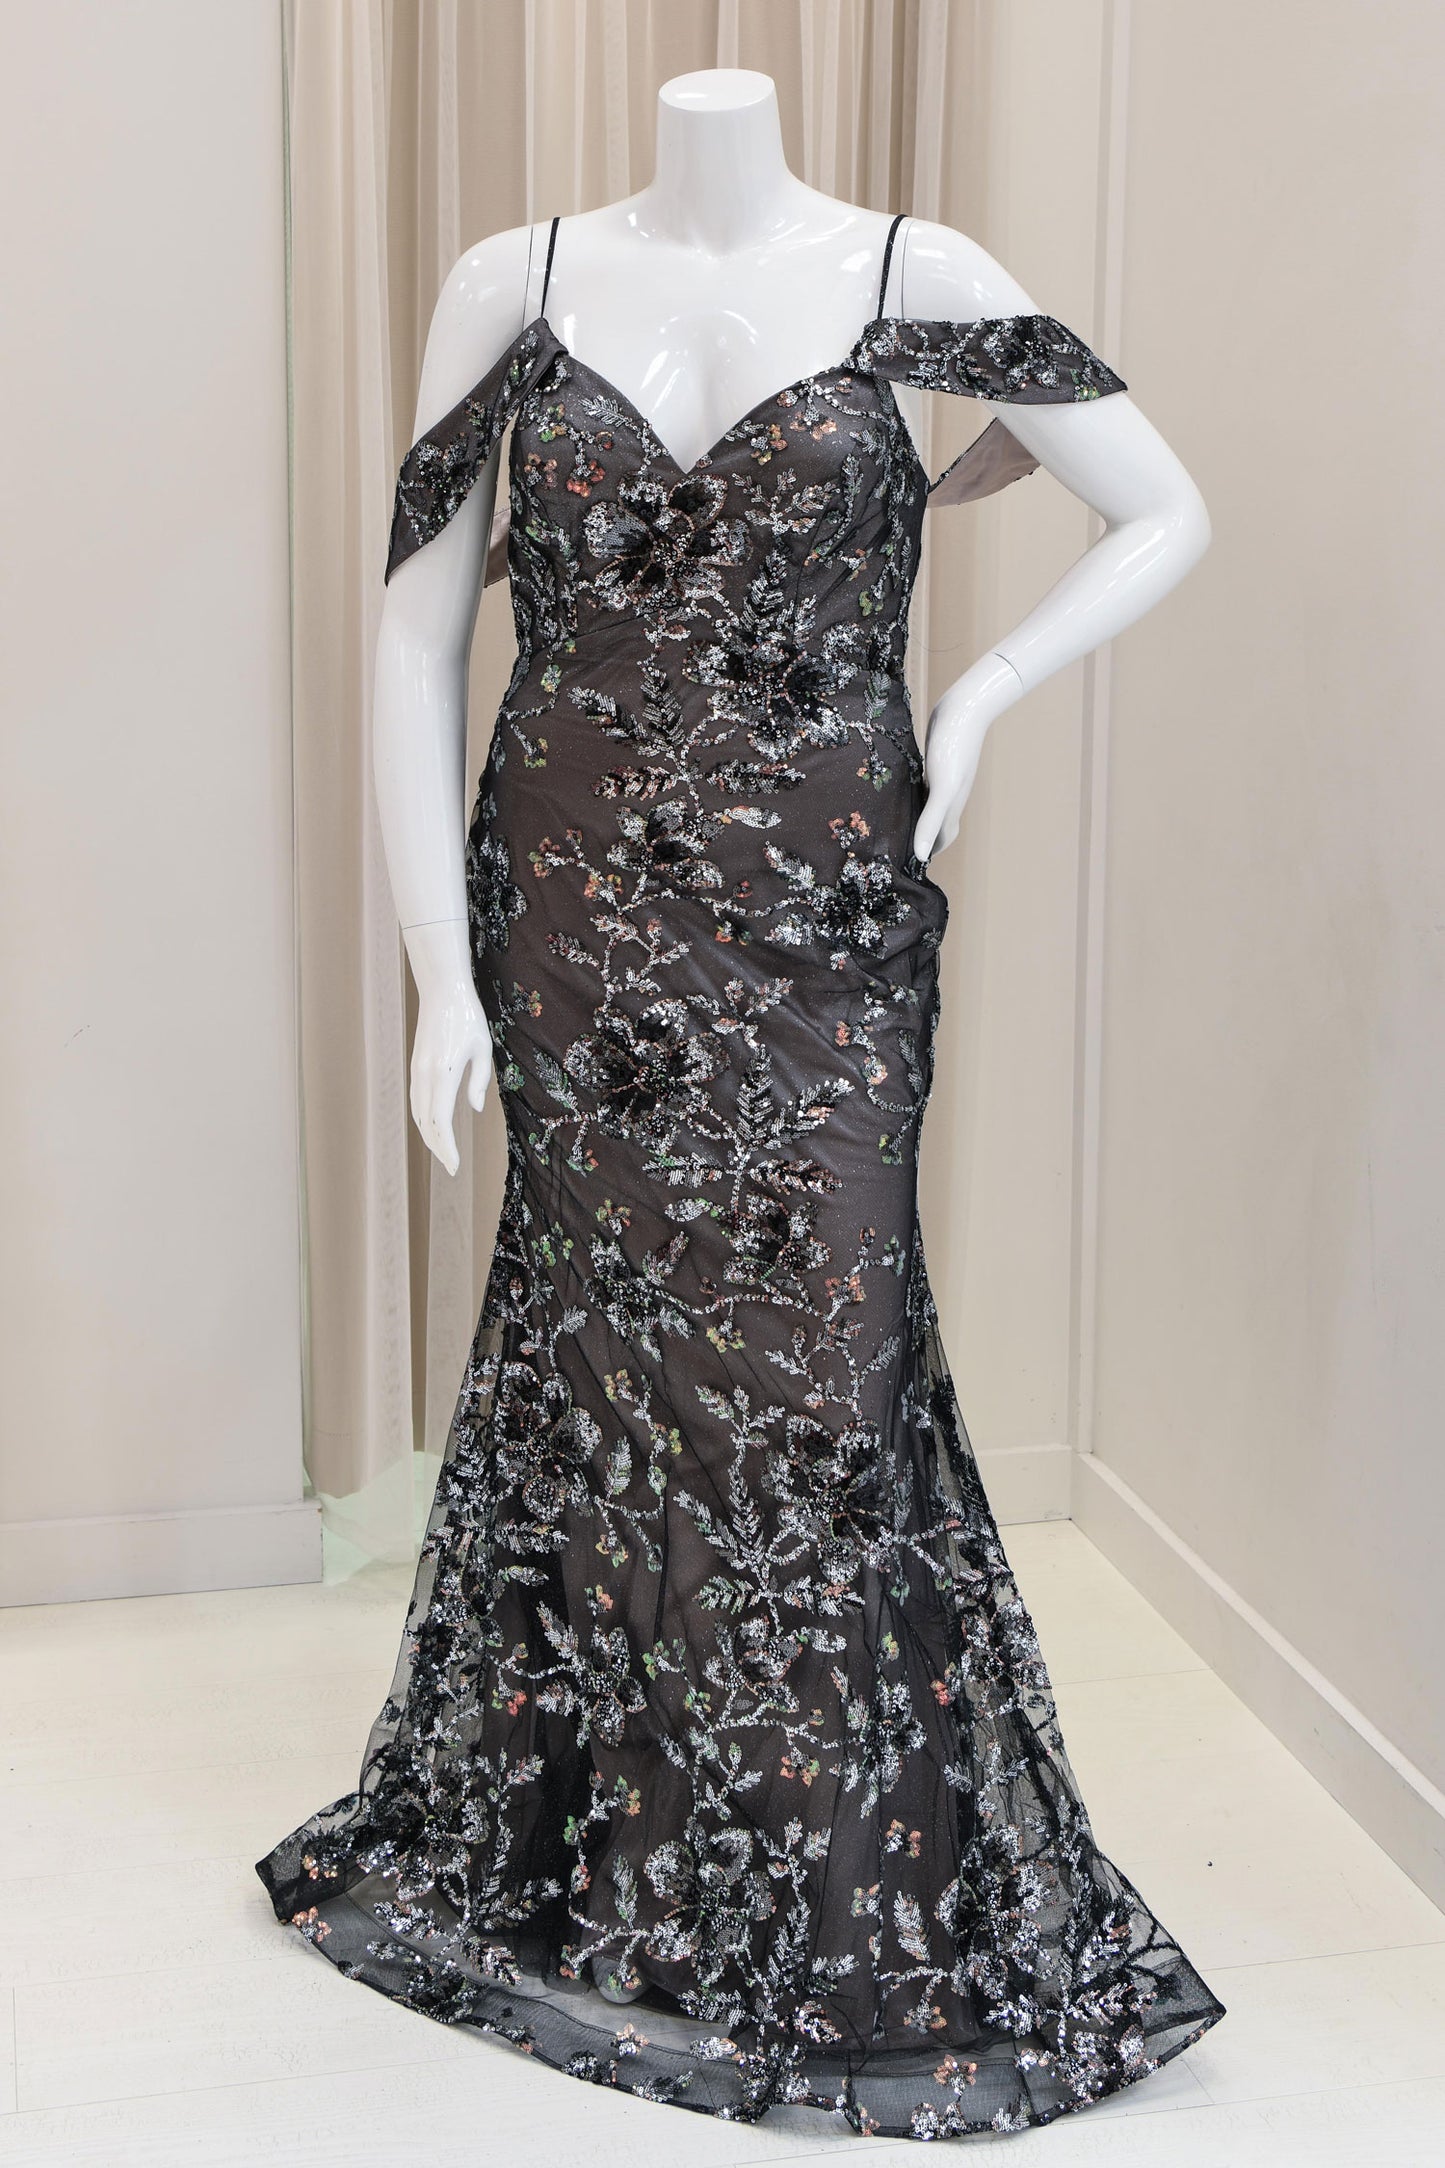 Dominique Sequin Evening Gown in Charcoal